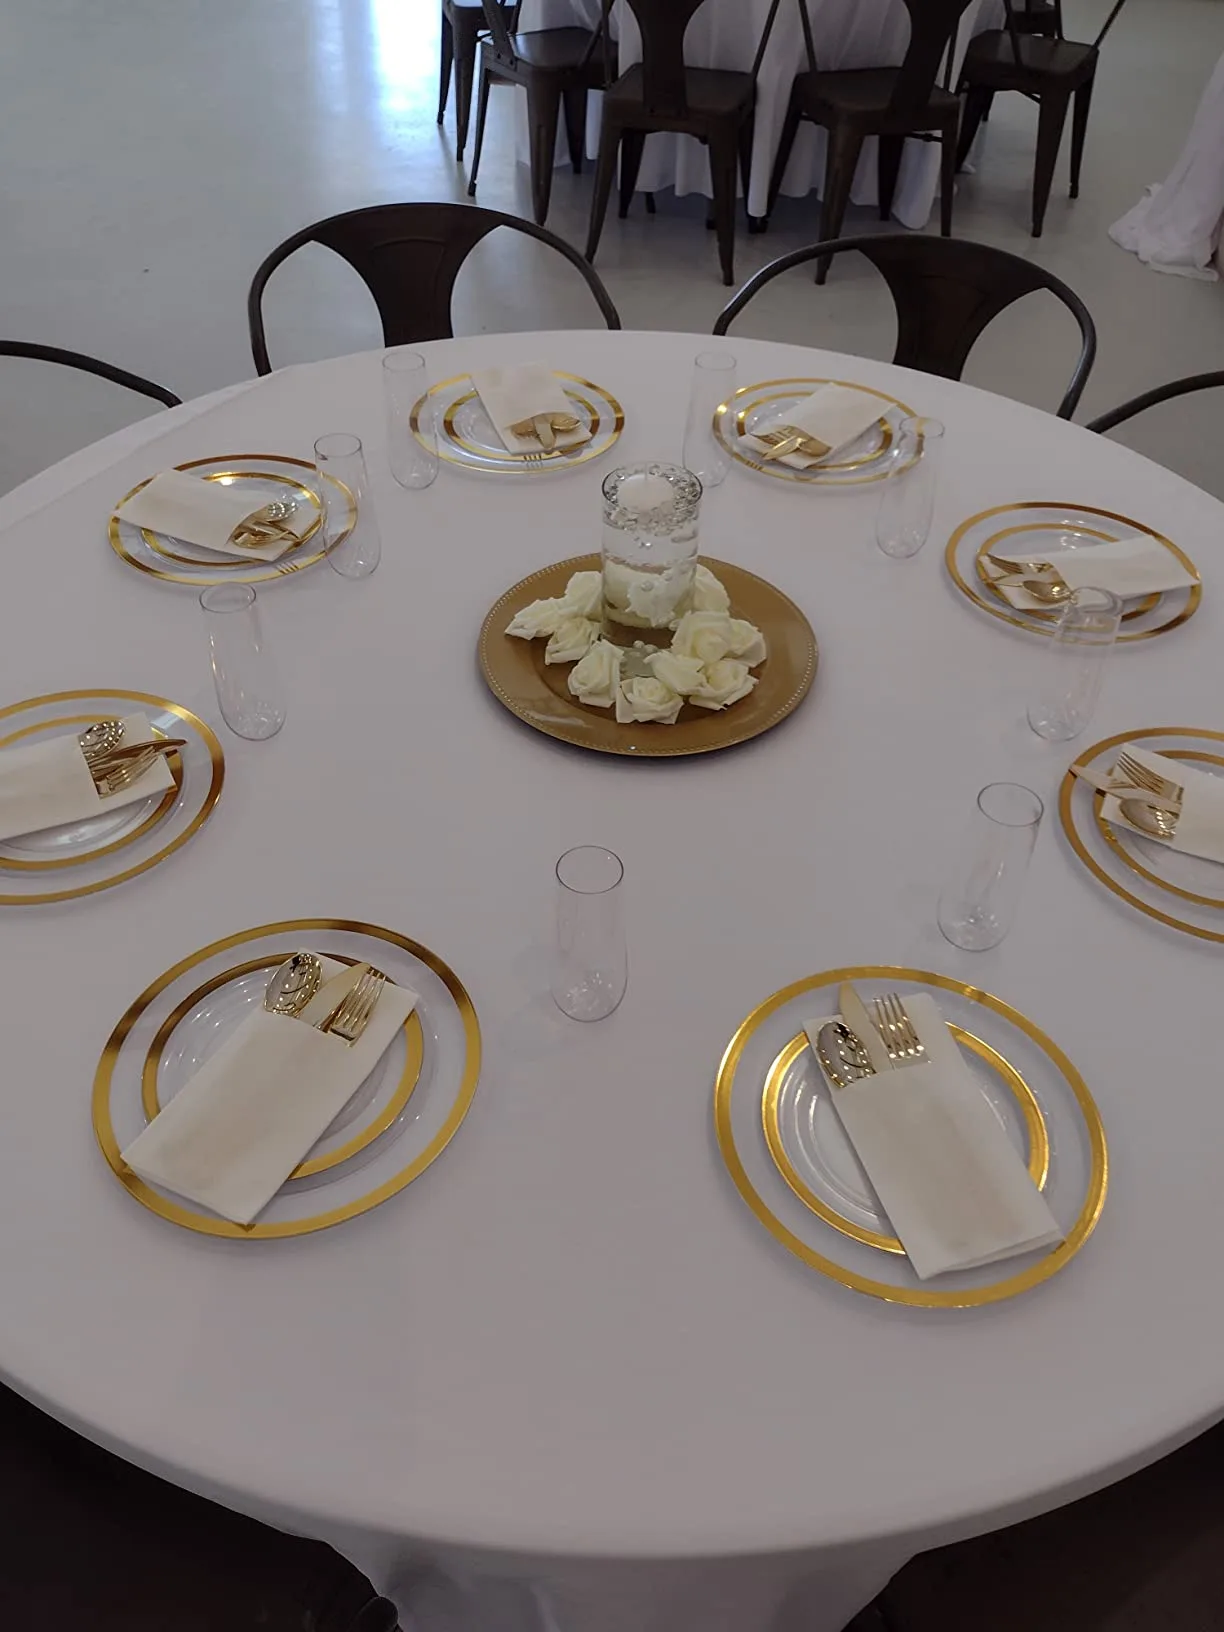 Clear Gold Plates Round Gold Chargerplates White Round Table Top Angle View Dinner Table Setting